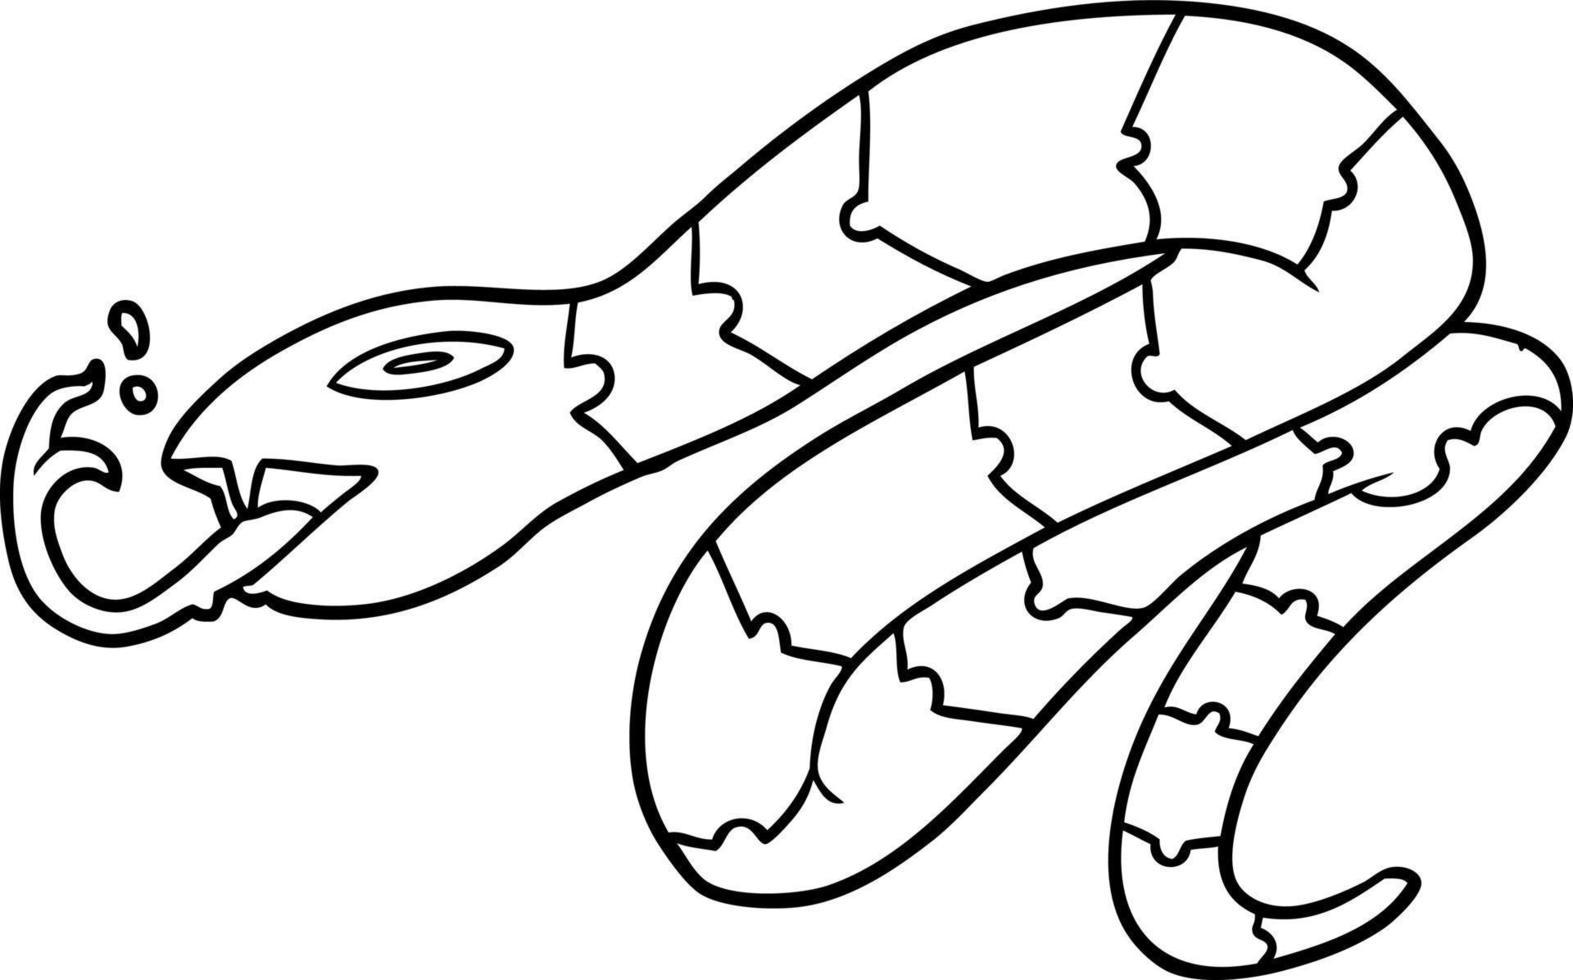 line drawing of a hissing snake vector